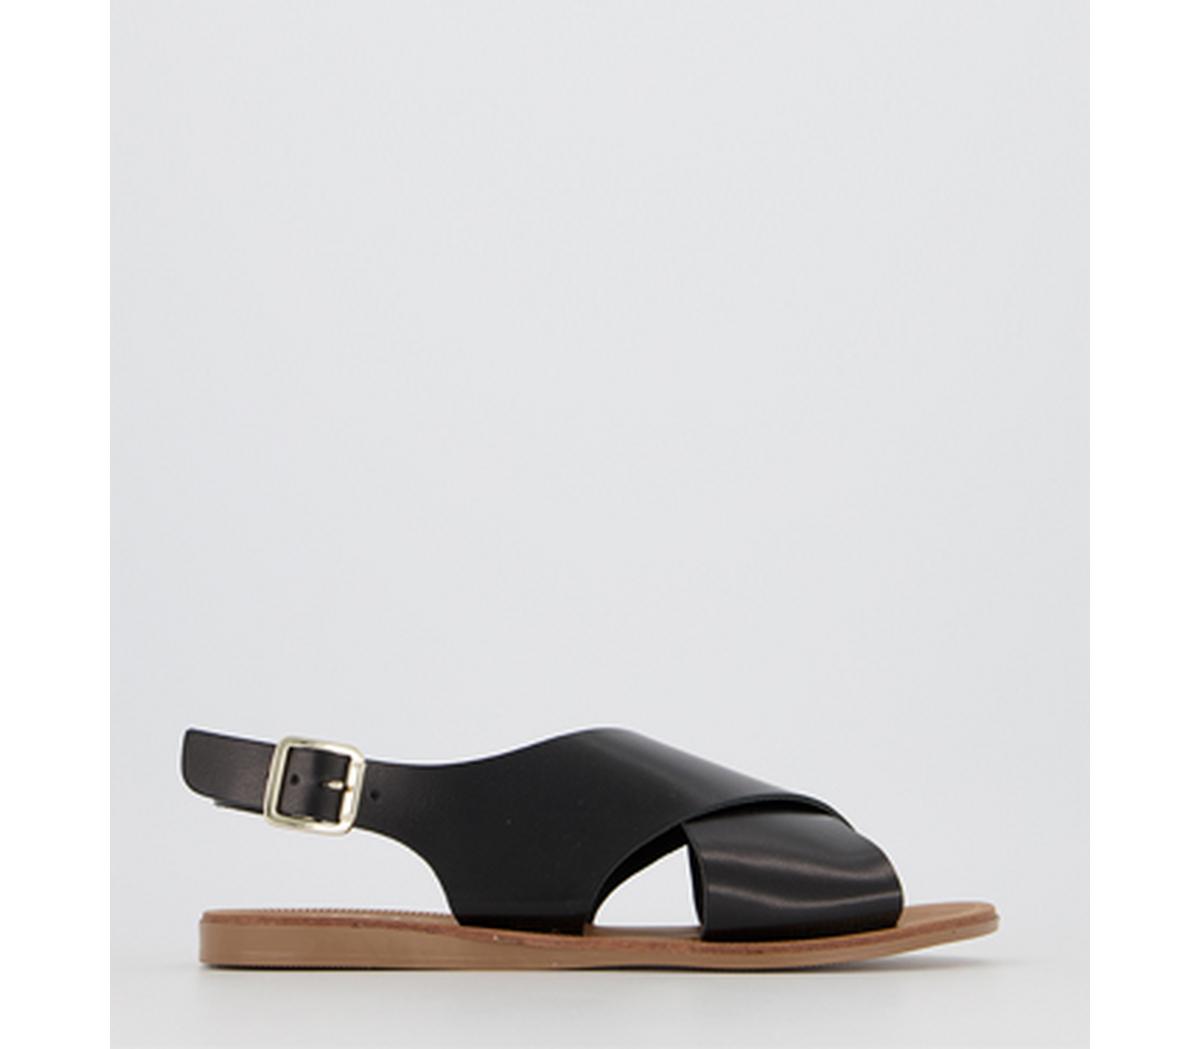 OFFICESeychelles Cross Strap SandalsBlack Leather